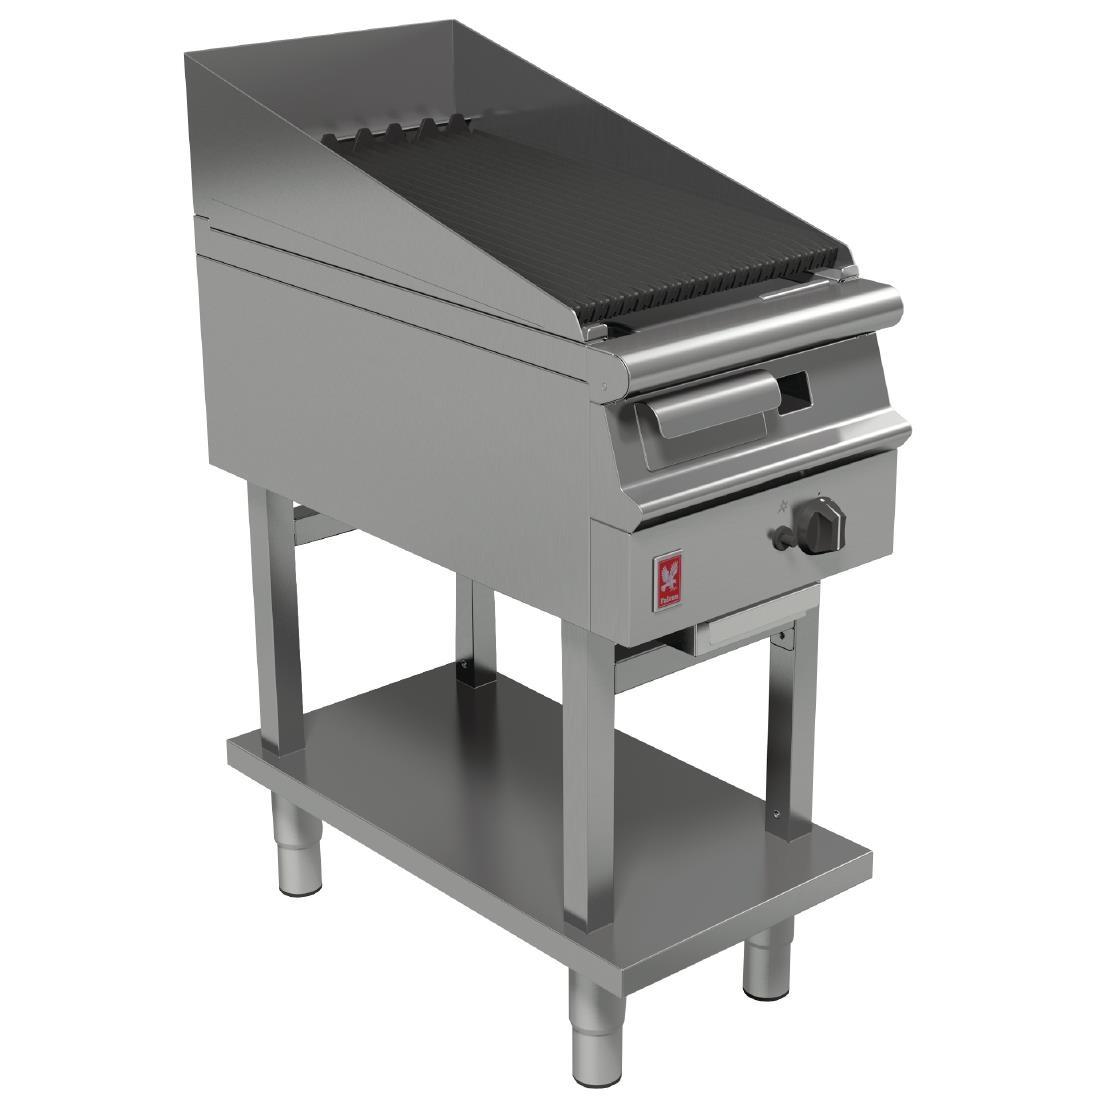 Falcon Dominator Plus LPG Chargrill On Fixed Stand G3425 - GP024-P  - 1